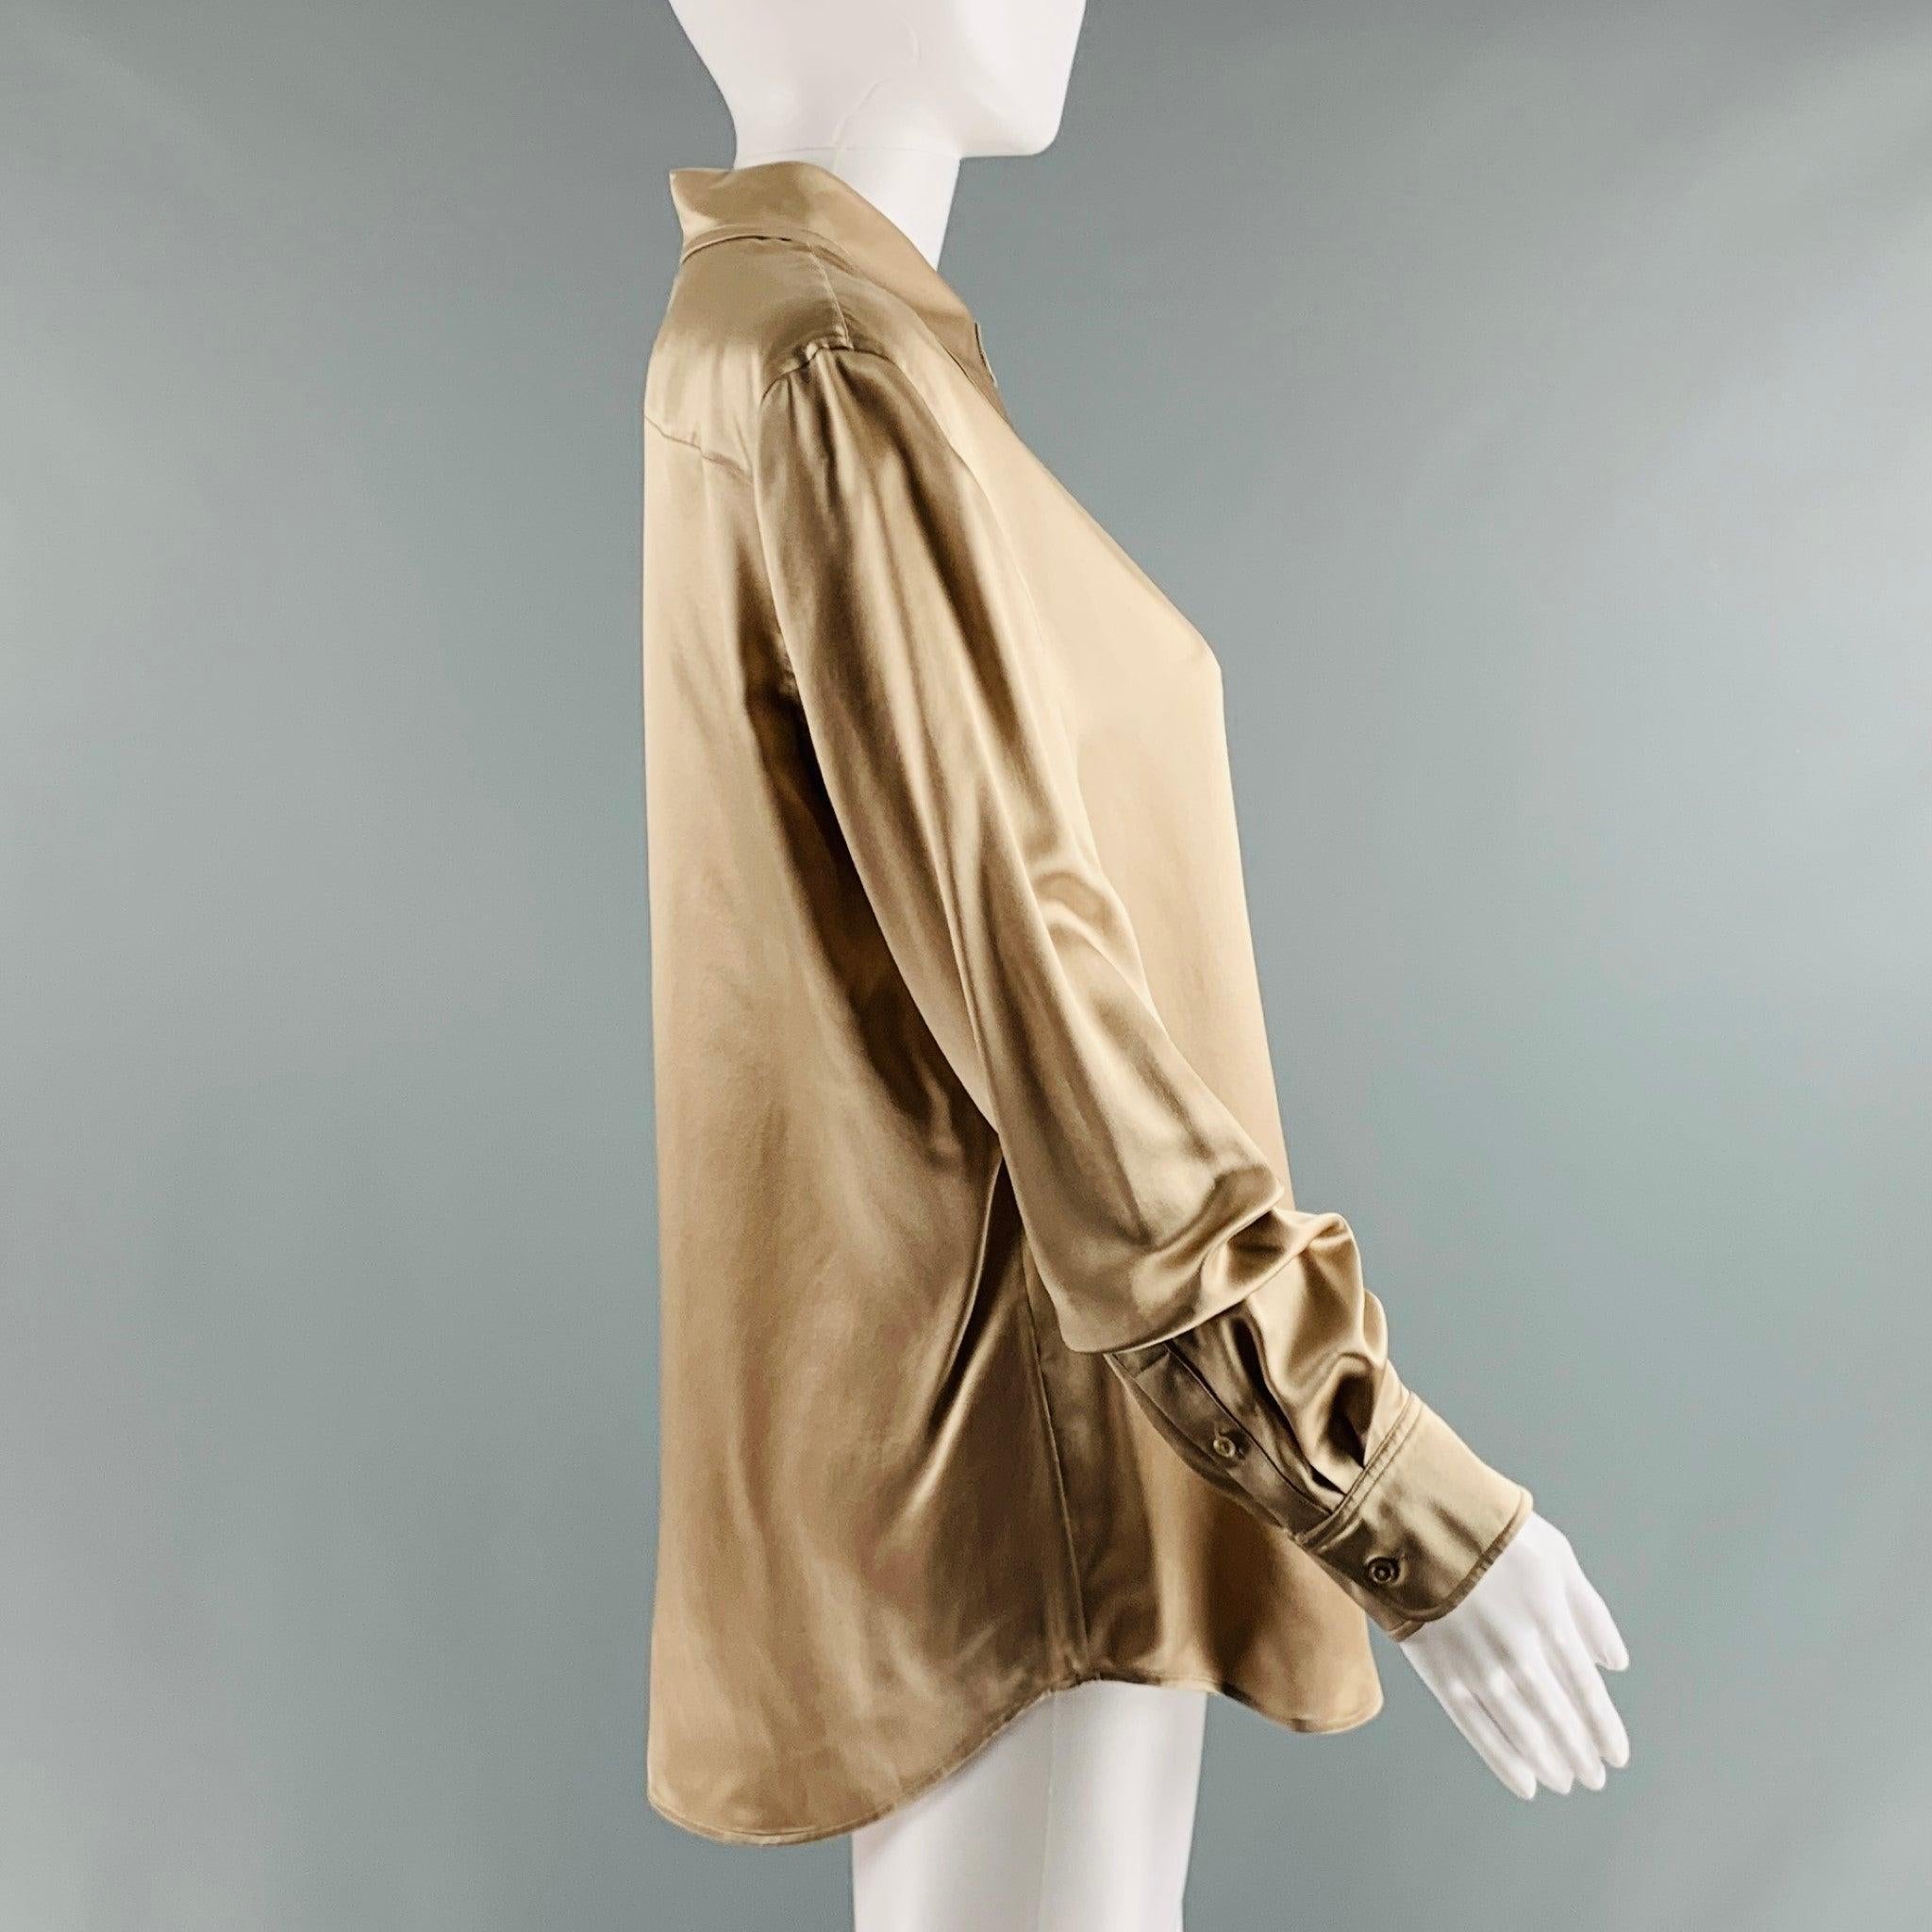 RALPH LAUREN COLLECTION
 long sleeves blouse comes in beige silk mulberry fabric features a straight collar, and button down closure. Made in Italy.Excellent Pre-Owned Condition.  

Marked:   8 

Measurements: 
 
Shoulder: 17 inches Bust: 44 inches